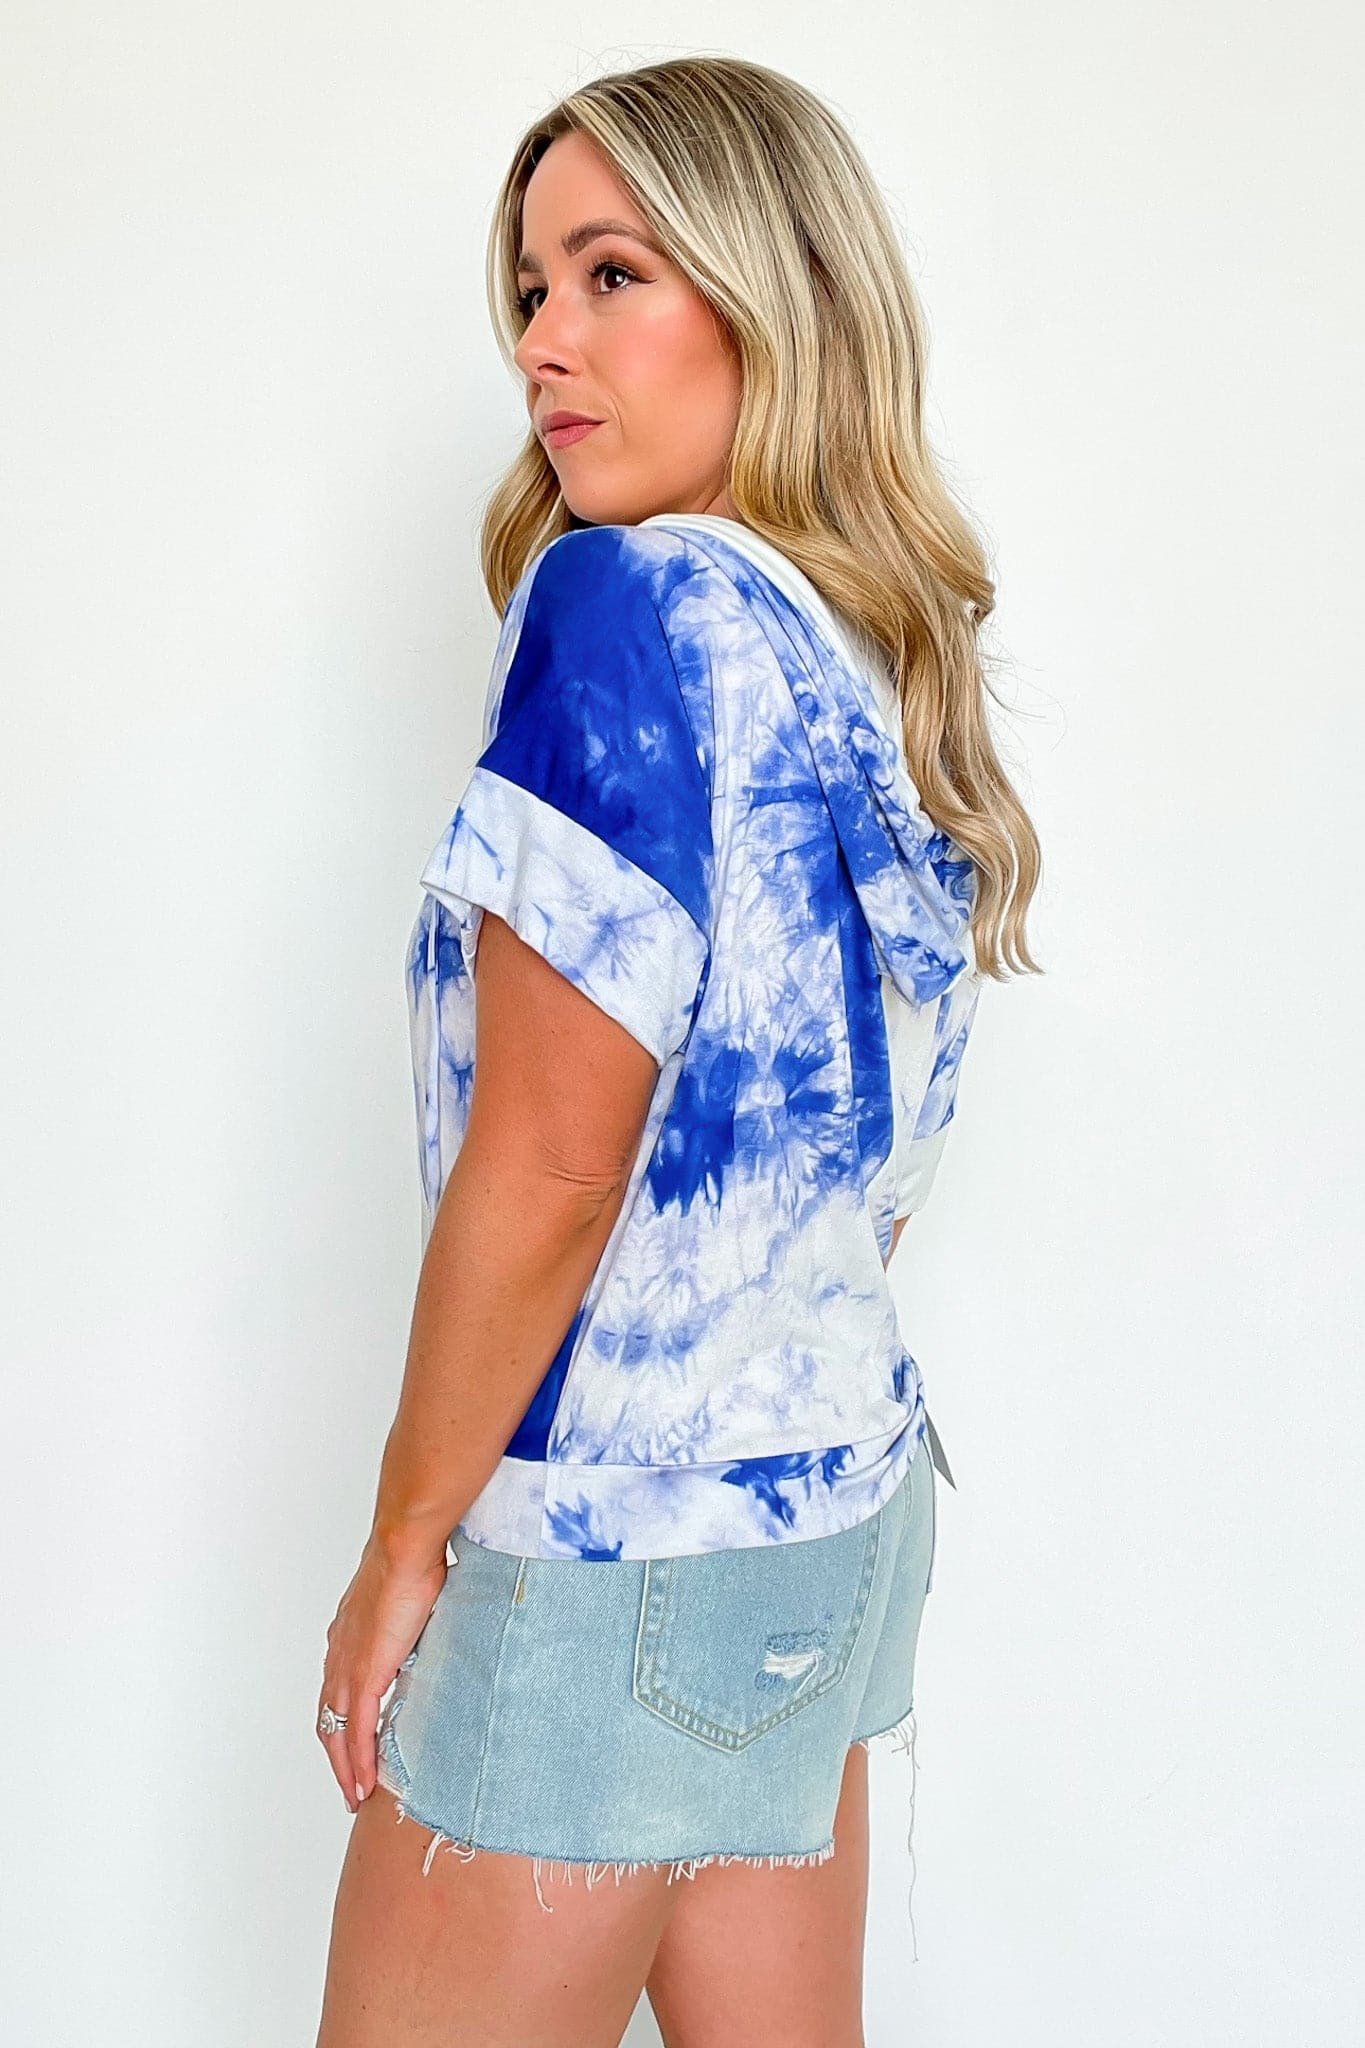  Caribe Short Sleeve Tie Dye Hooded Top - FINAL SALE - Madison and Mallory